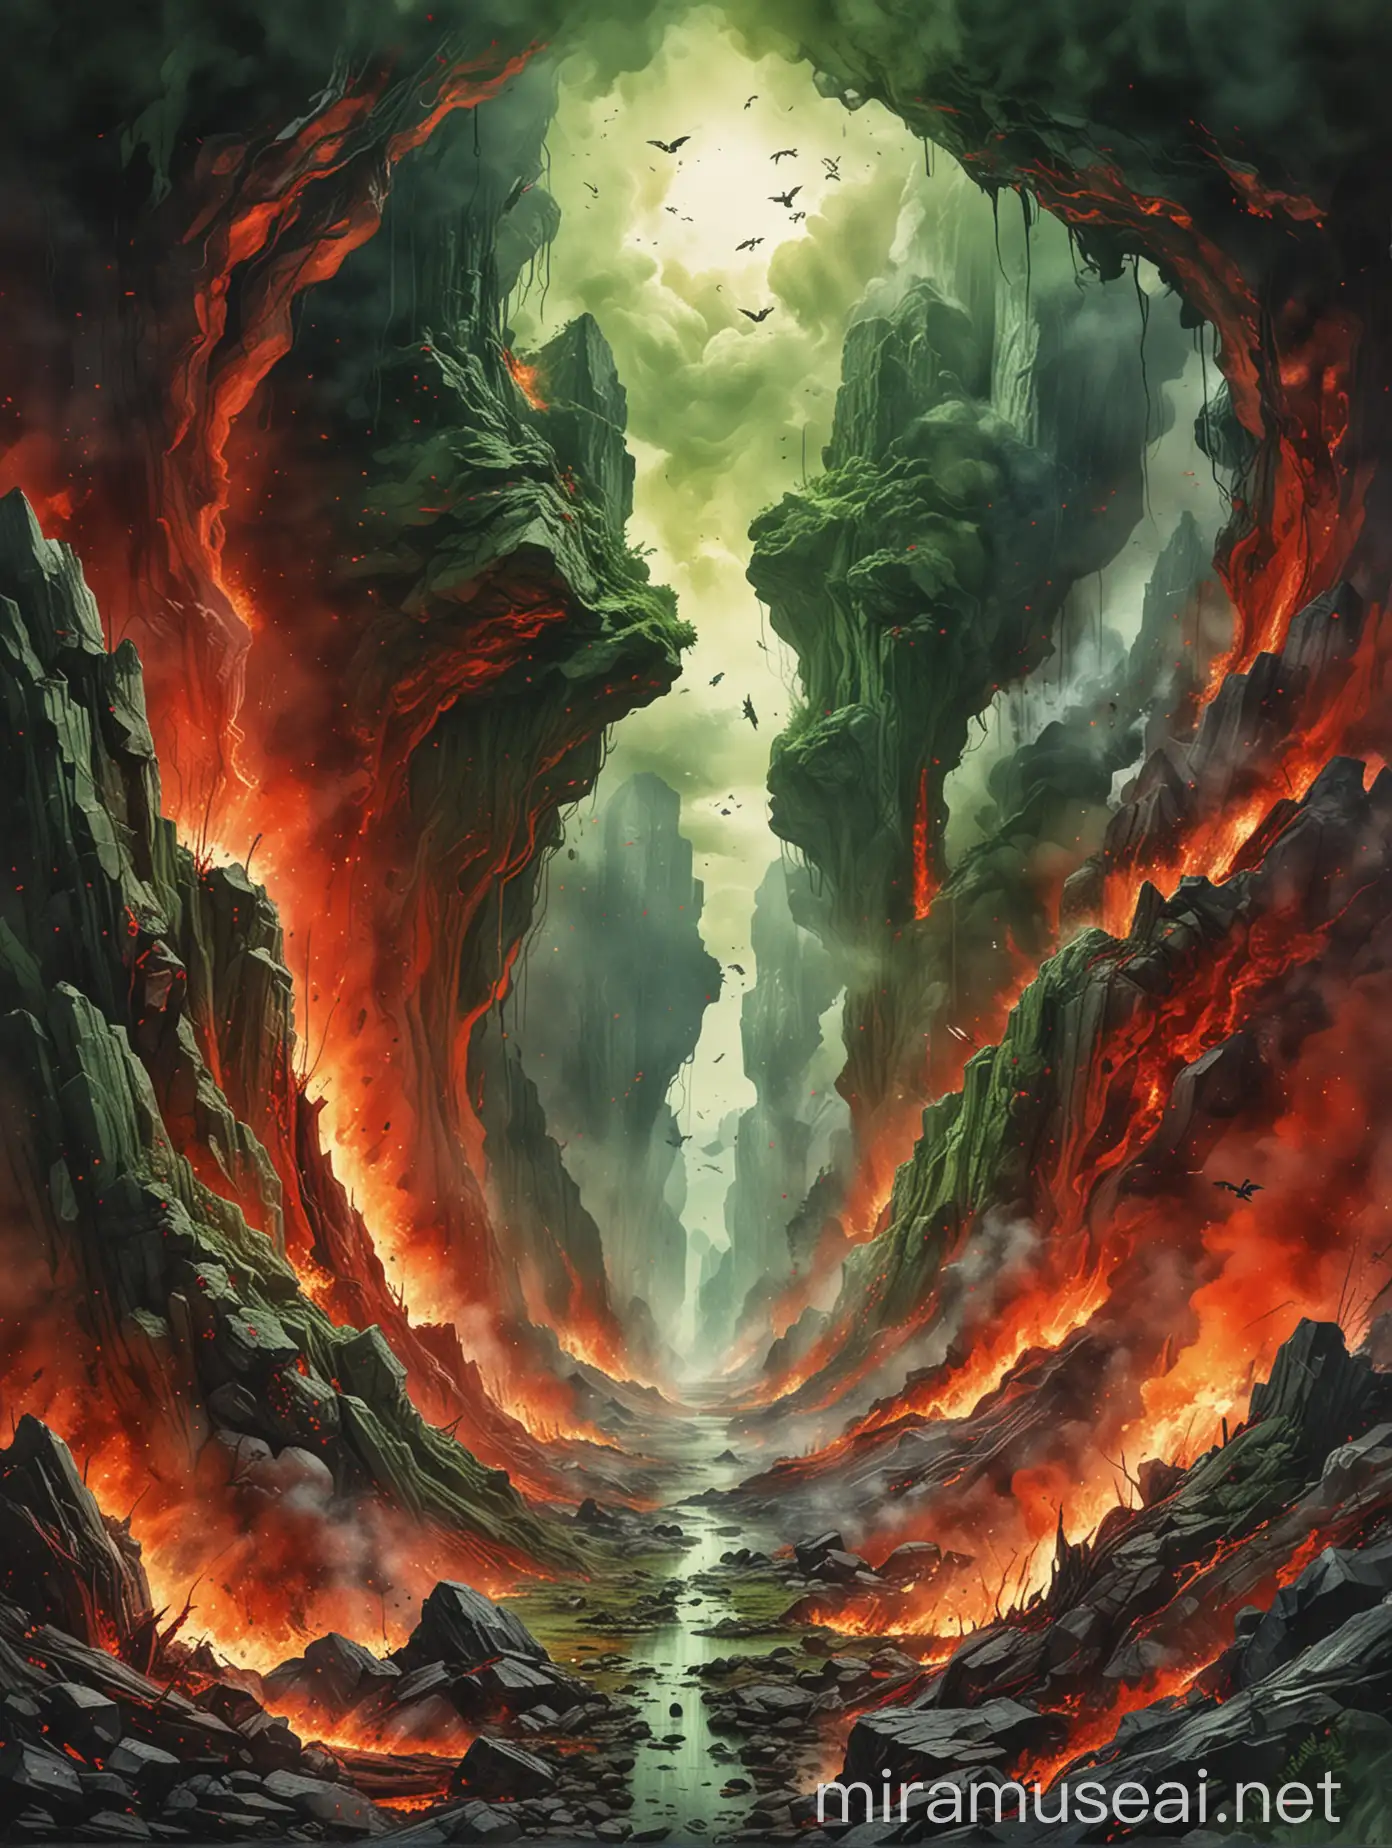 Apocalyptic Aerial Illustration Angels Falling from the Sky in a World Engulfed in Flames